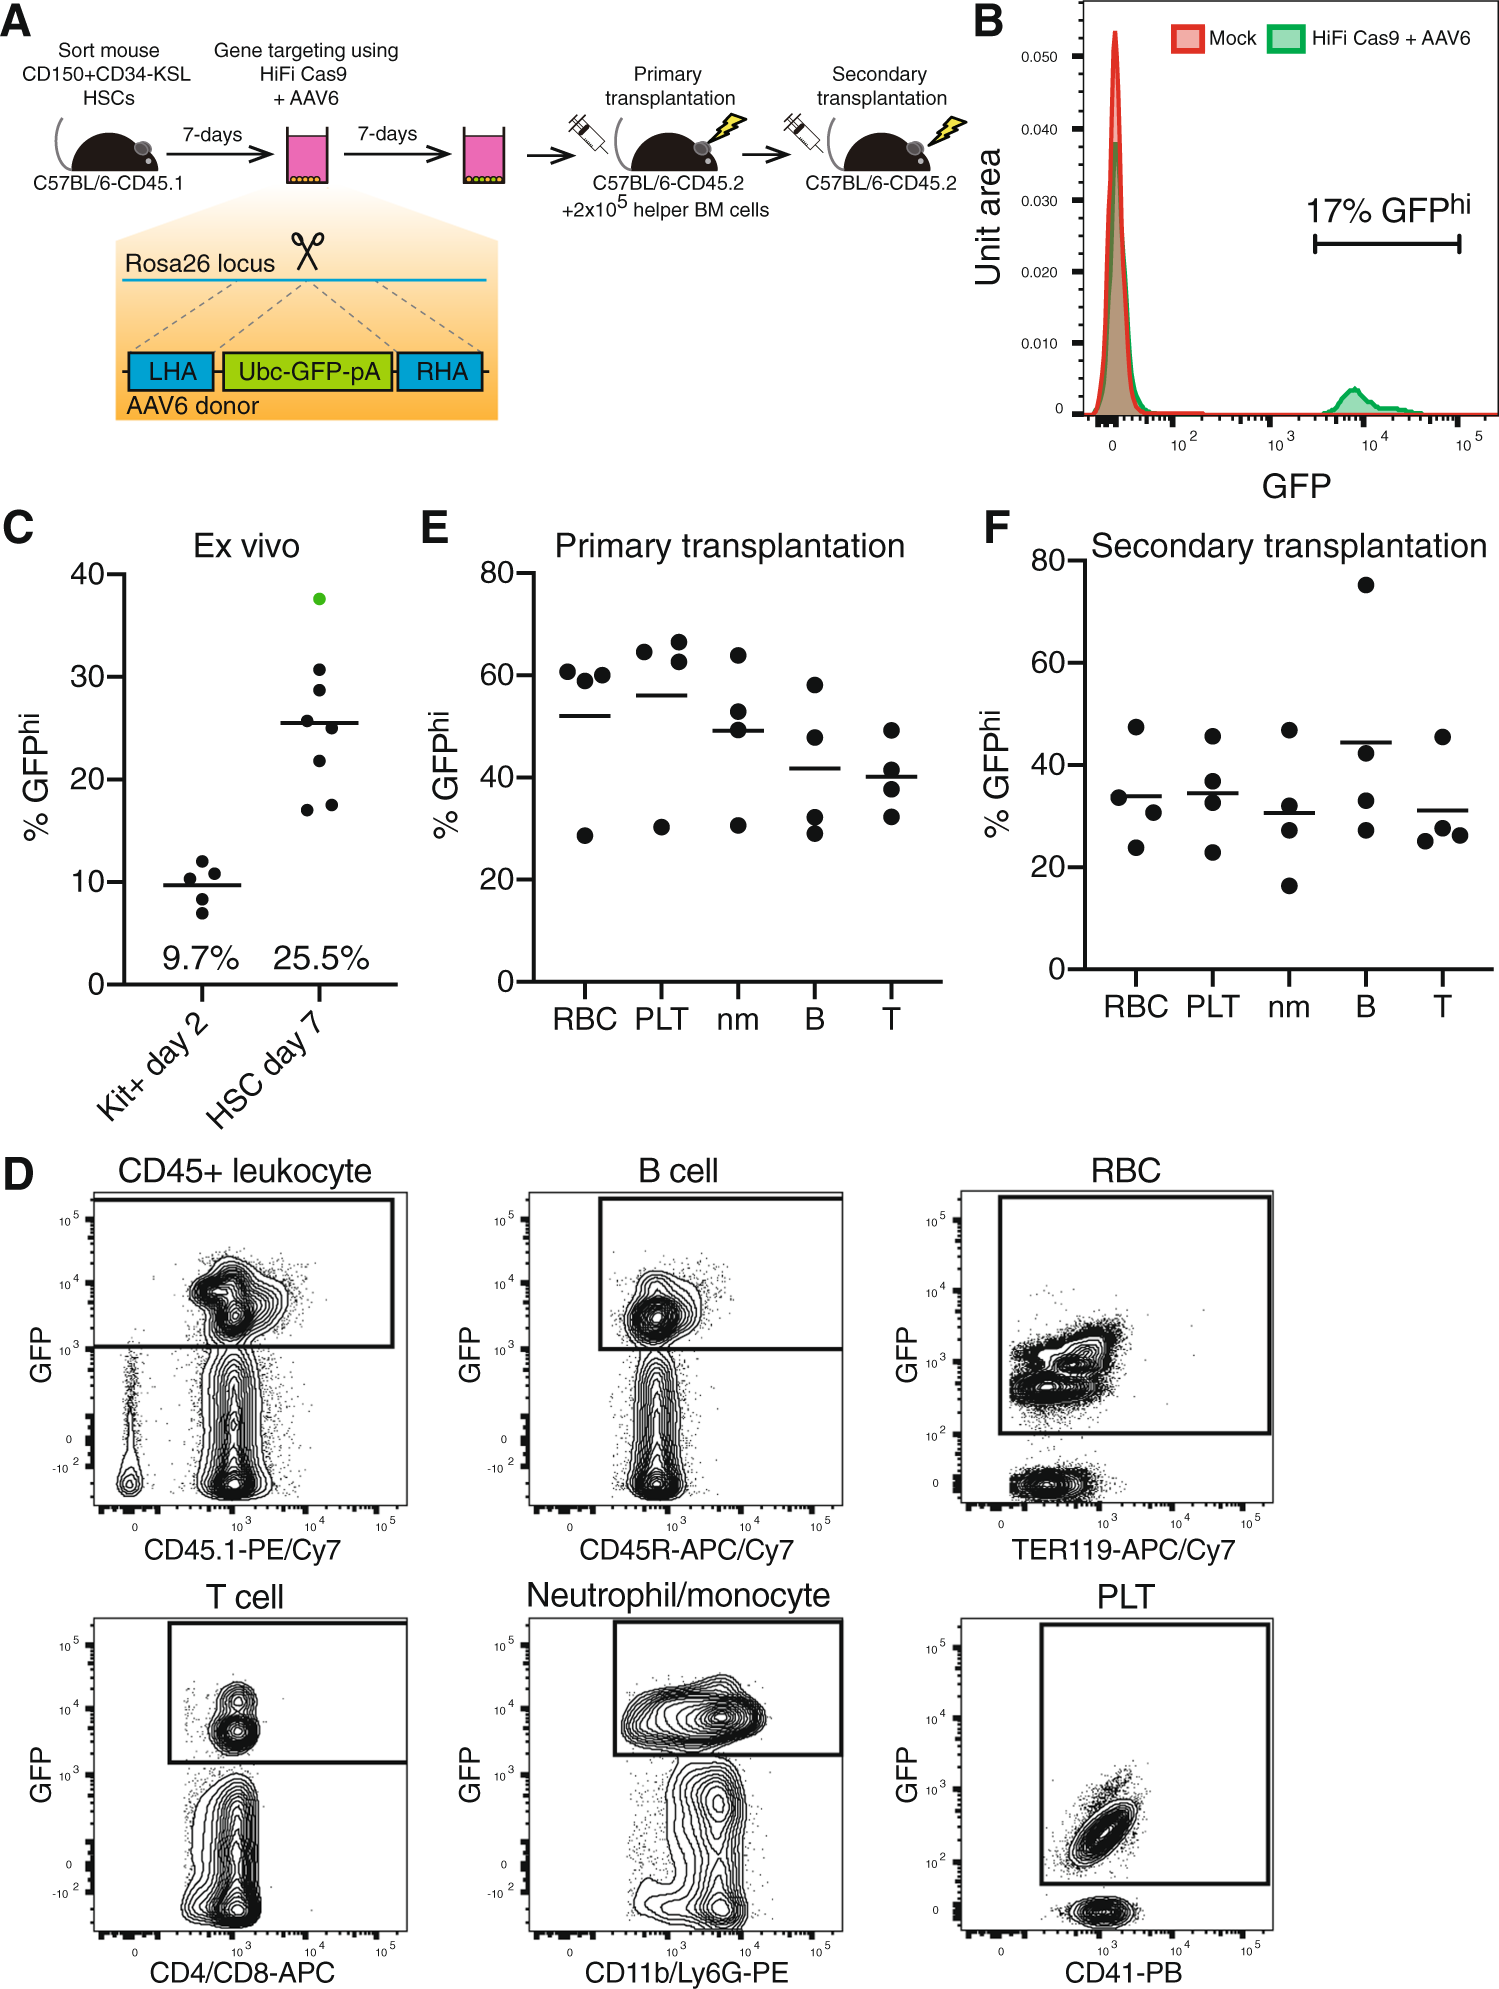 Cas9 Aav6 Gene Correction Of Beta Globin In Autologous Hscs Improves Sickle Cell Disease Erythropoiesis In Mice Nature Communications